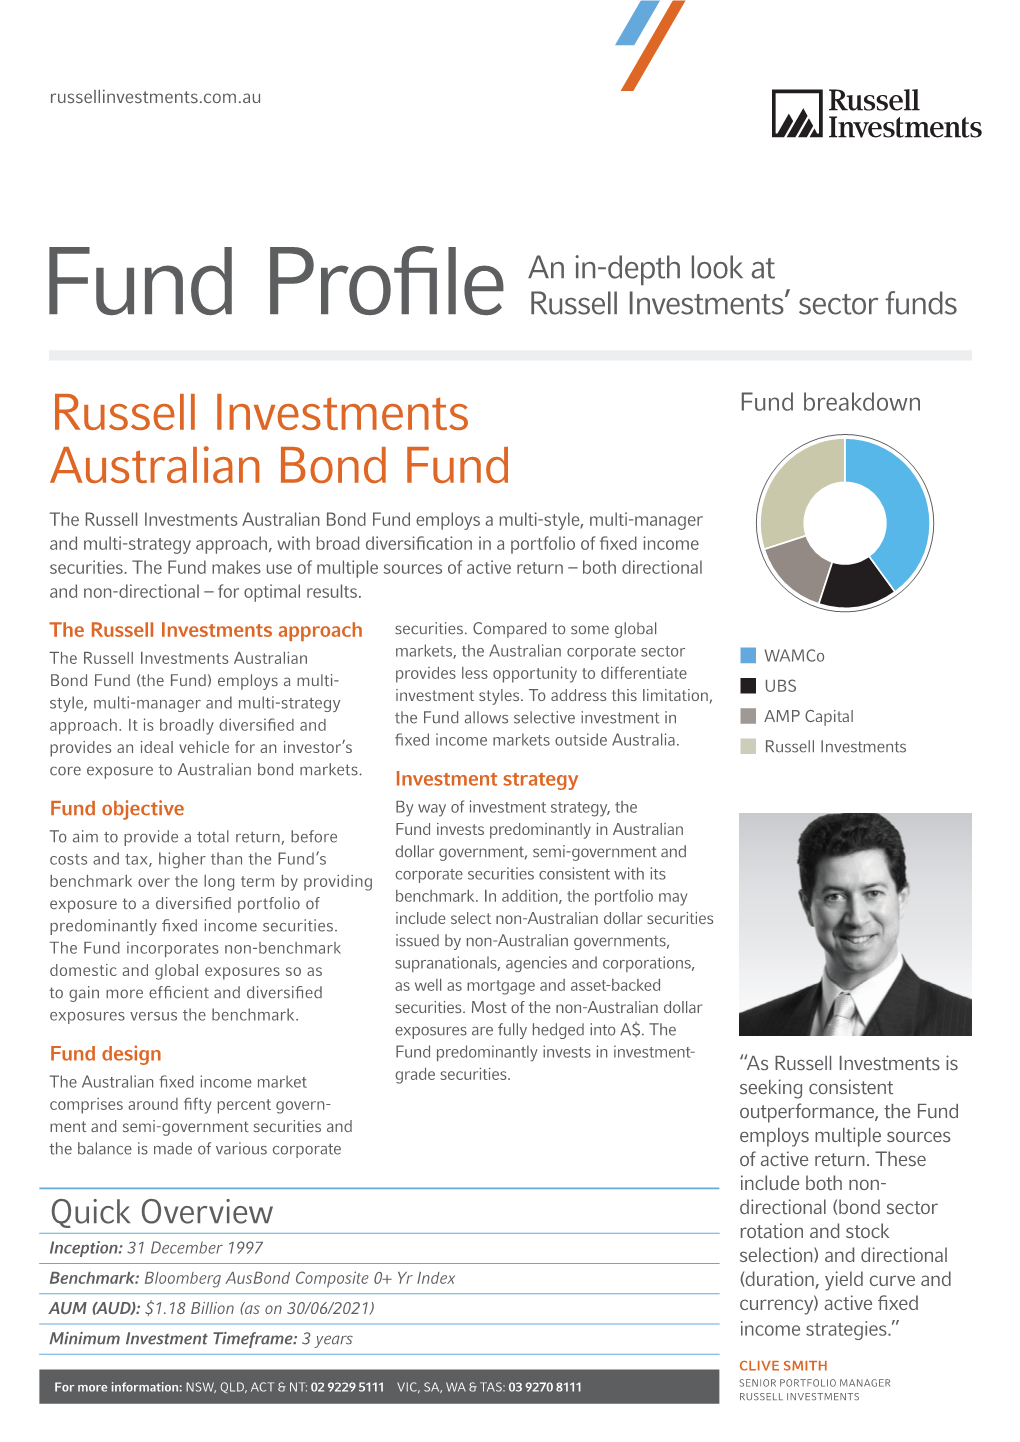 Fund Profile: Russell Investments Australian Bond Fund